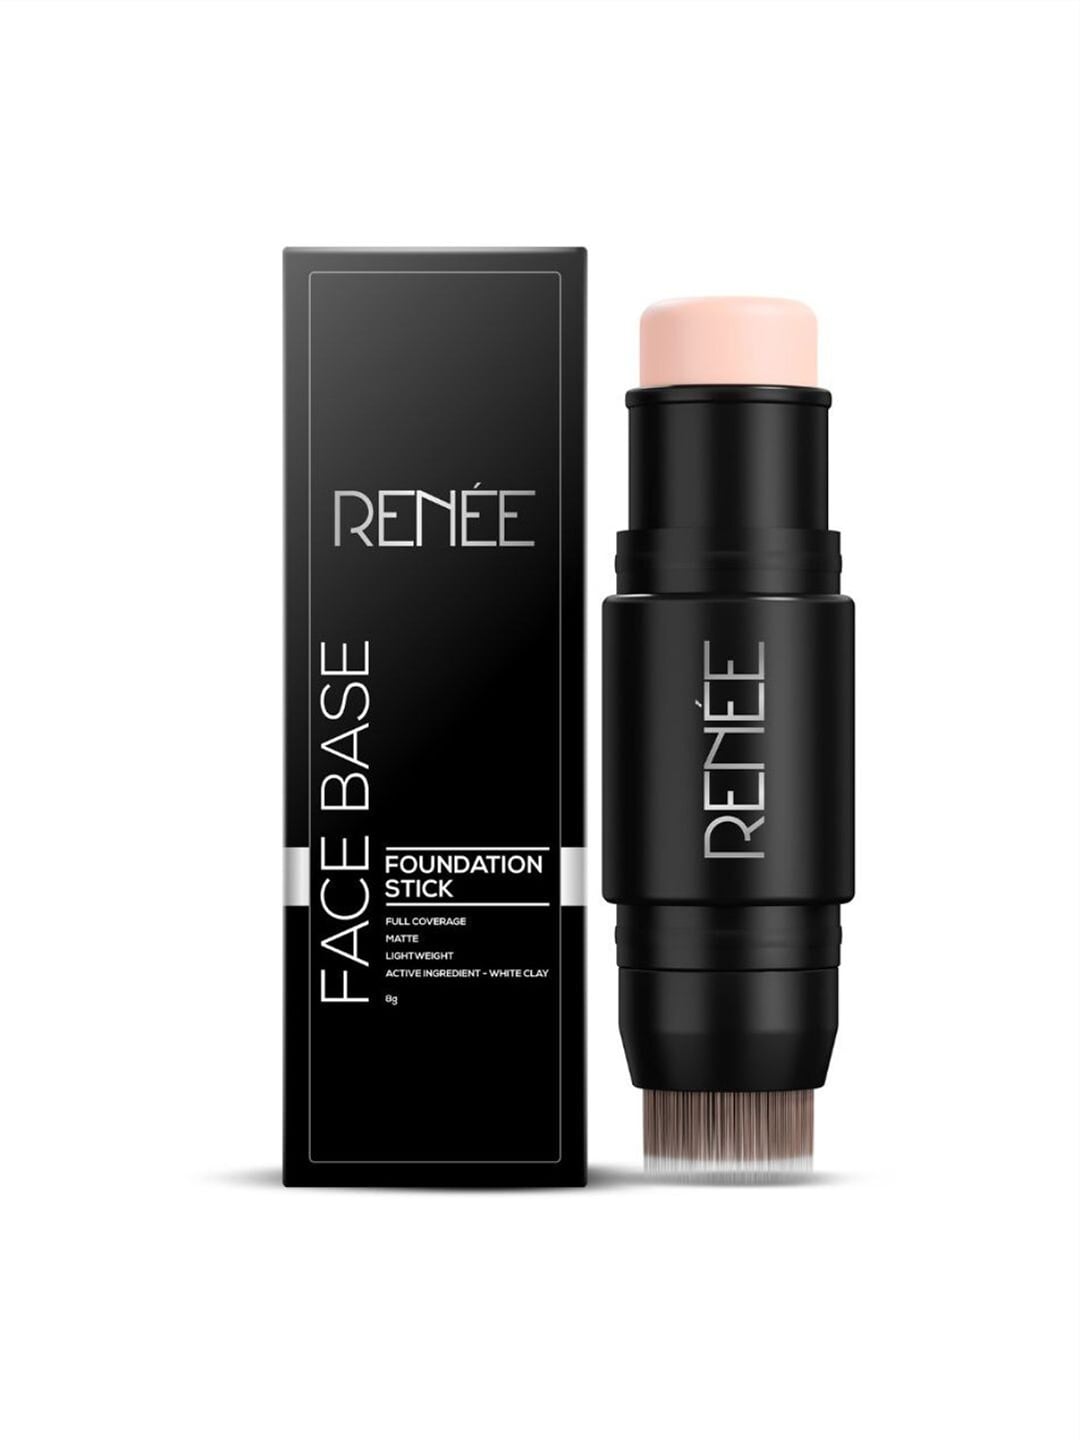 RENEE Face Base Foundation Stick with Applicator - Creamy Latte 8g Price in India